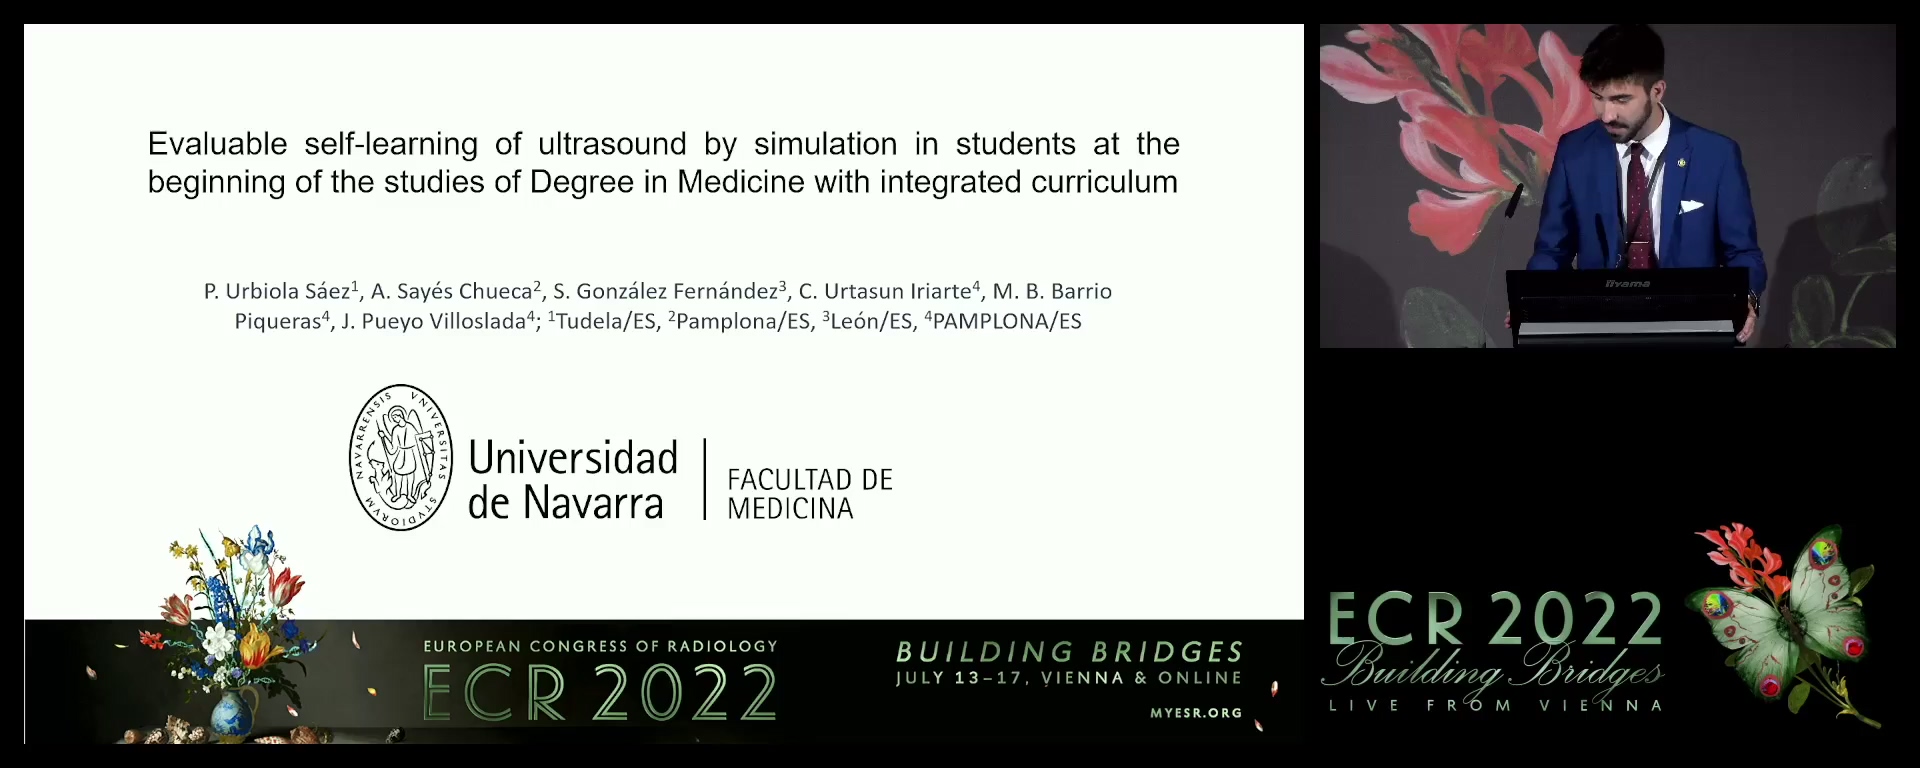 Evaluable self-learning of ultrasound by simulation in students at the beginning of the studies of Degree in Medicine with integrated curriculum. - Pedro Urbiola Sáez, Tudela / ES